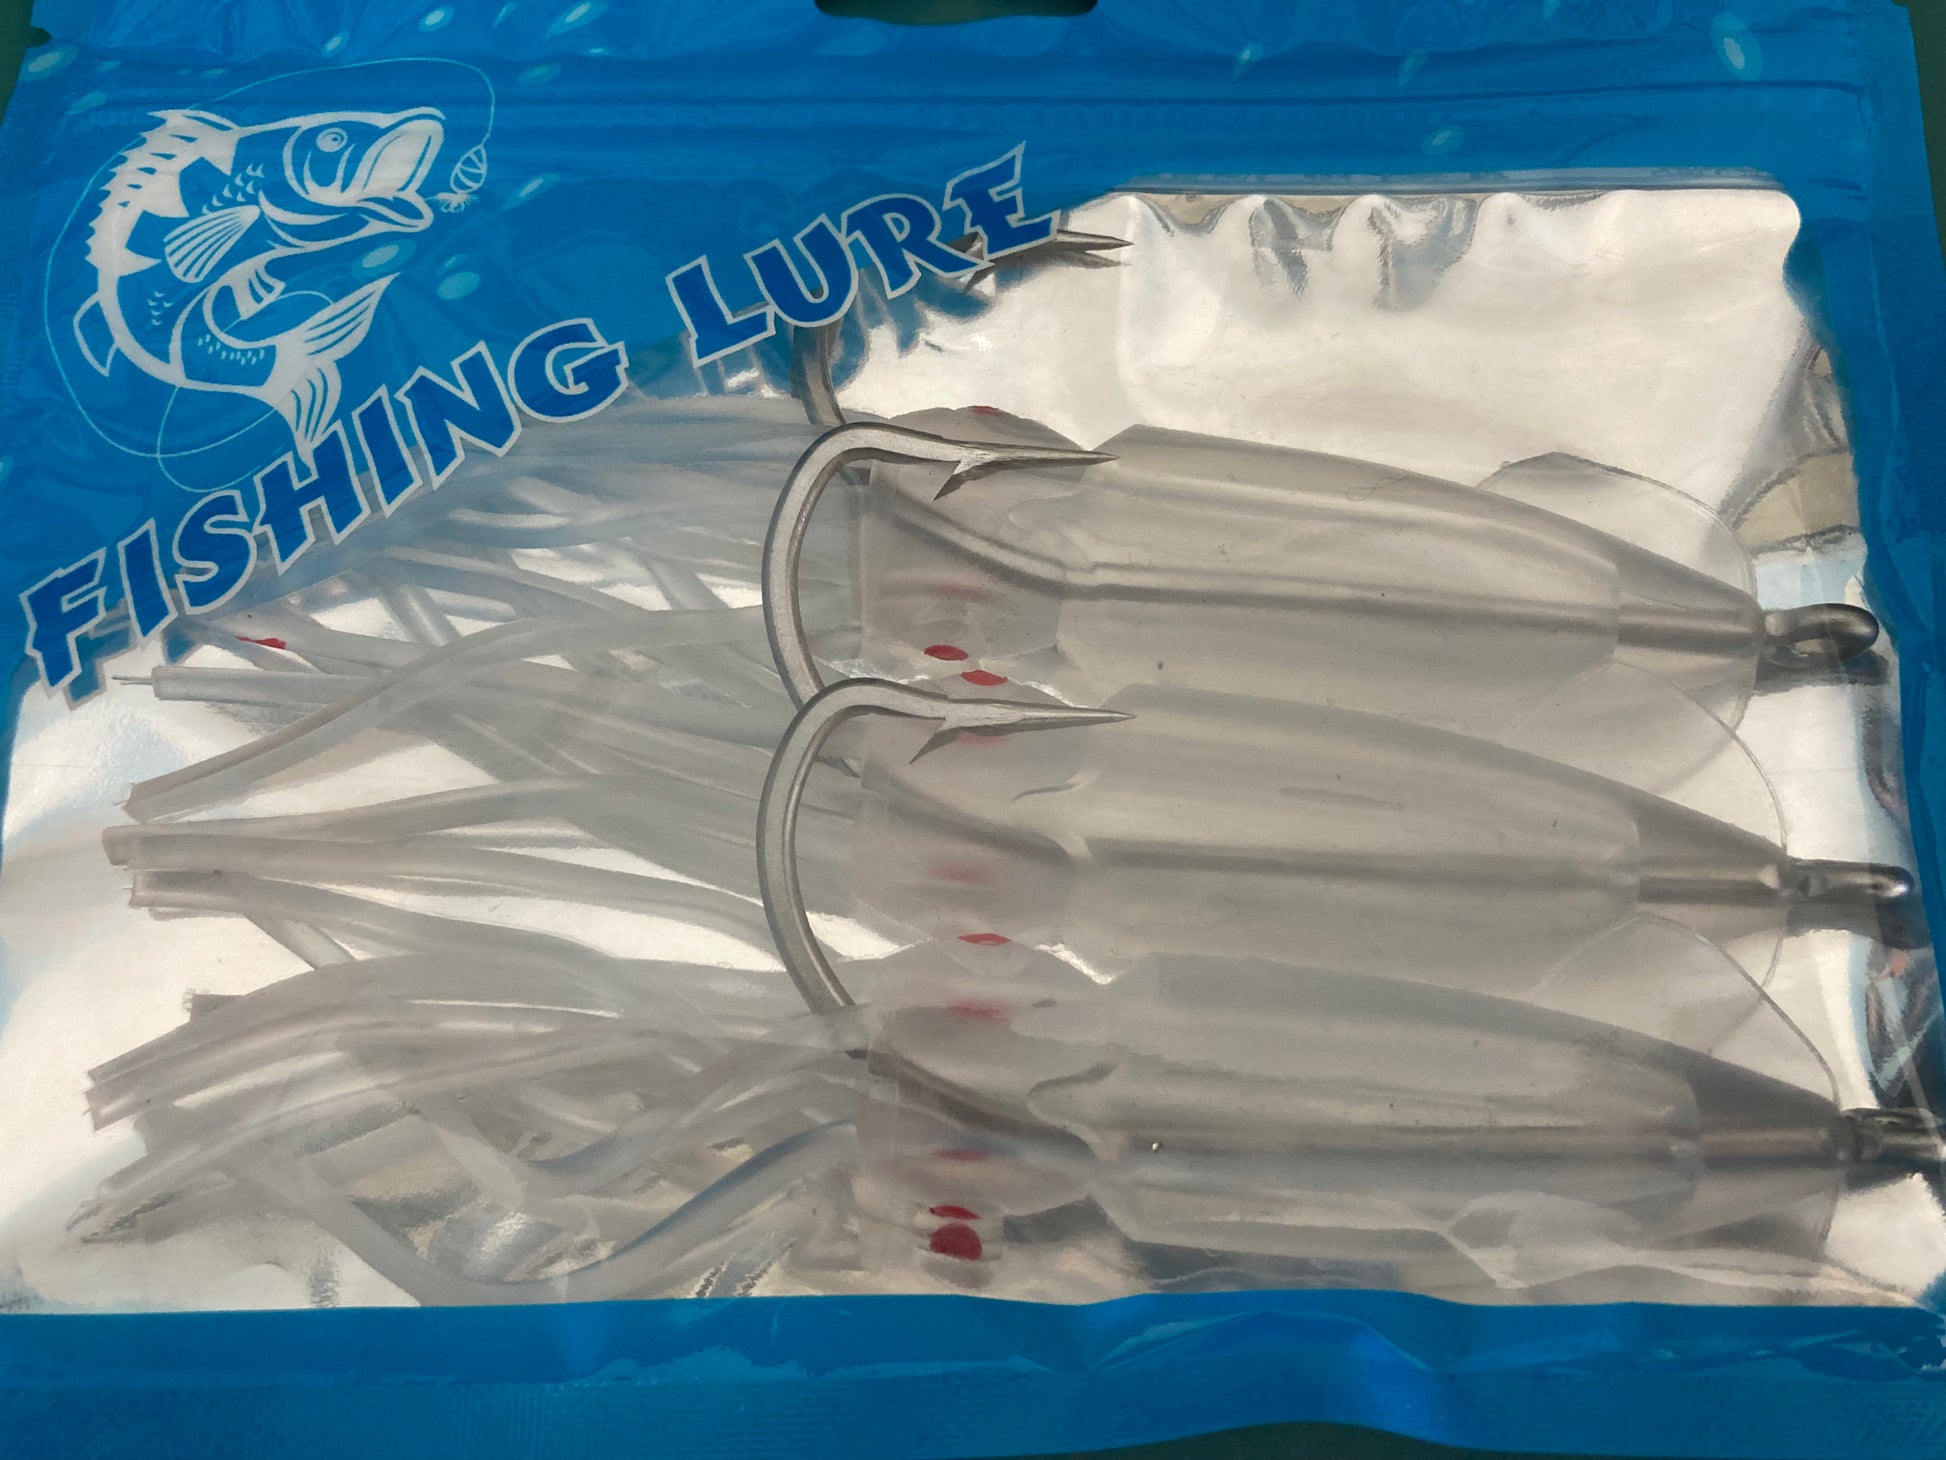 Wholesale Of 5 Large Minnow Fishing Minnow Fish Bait With Hook 14cm/23g  Saltwater Hard Baiting Lures From Tengyeungfish, $4.03